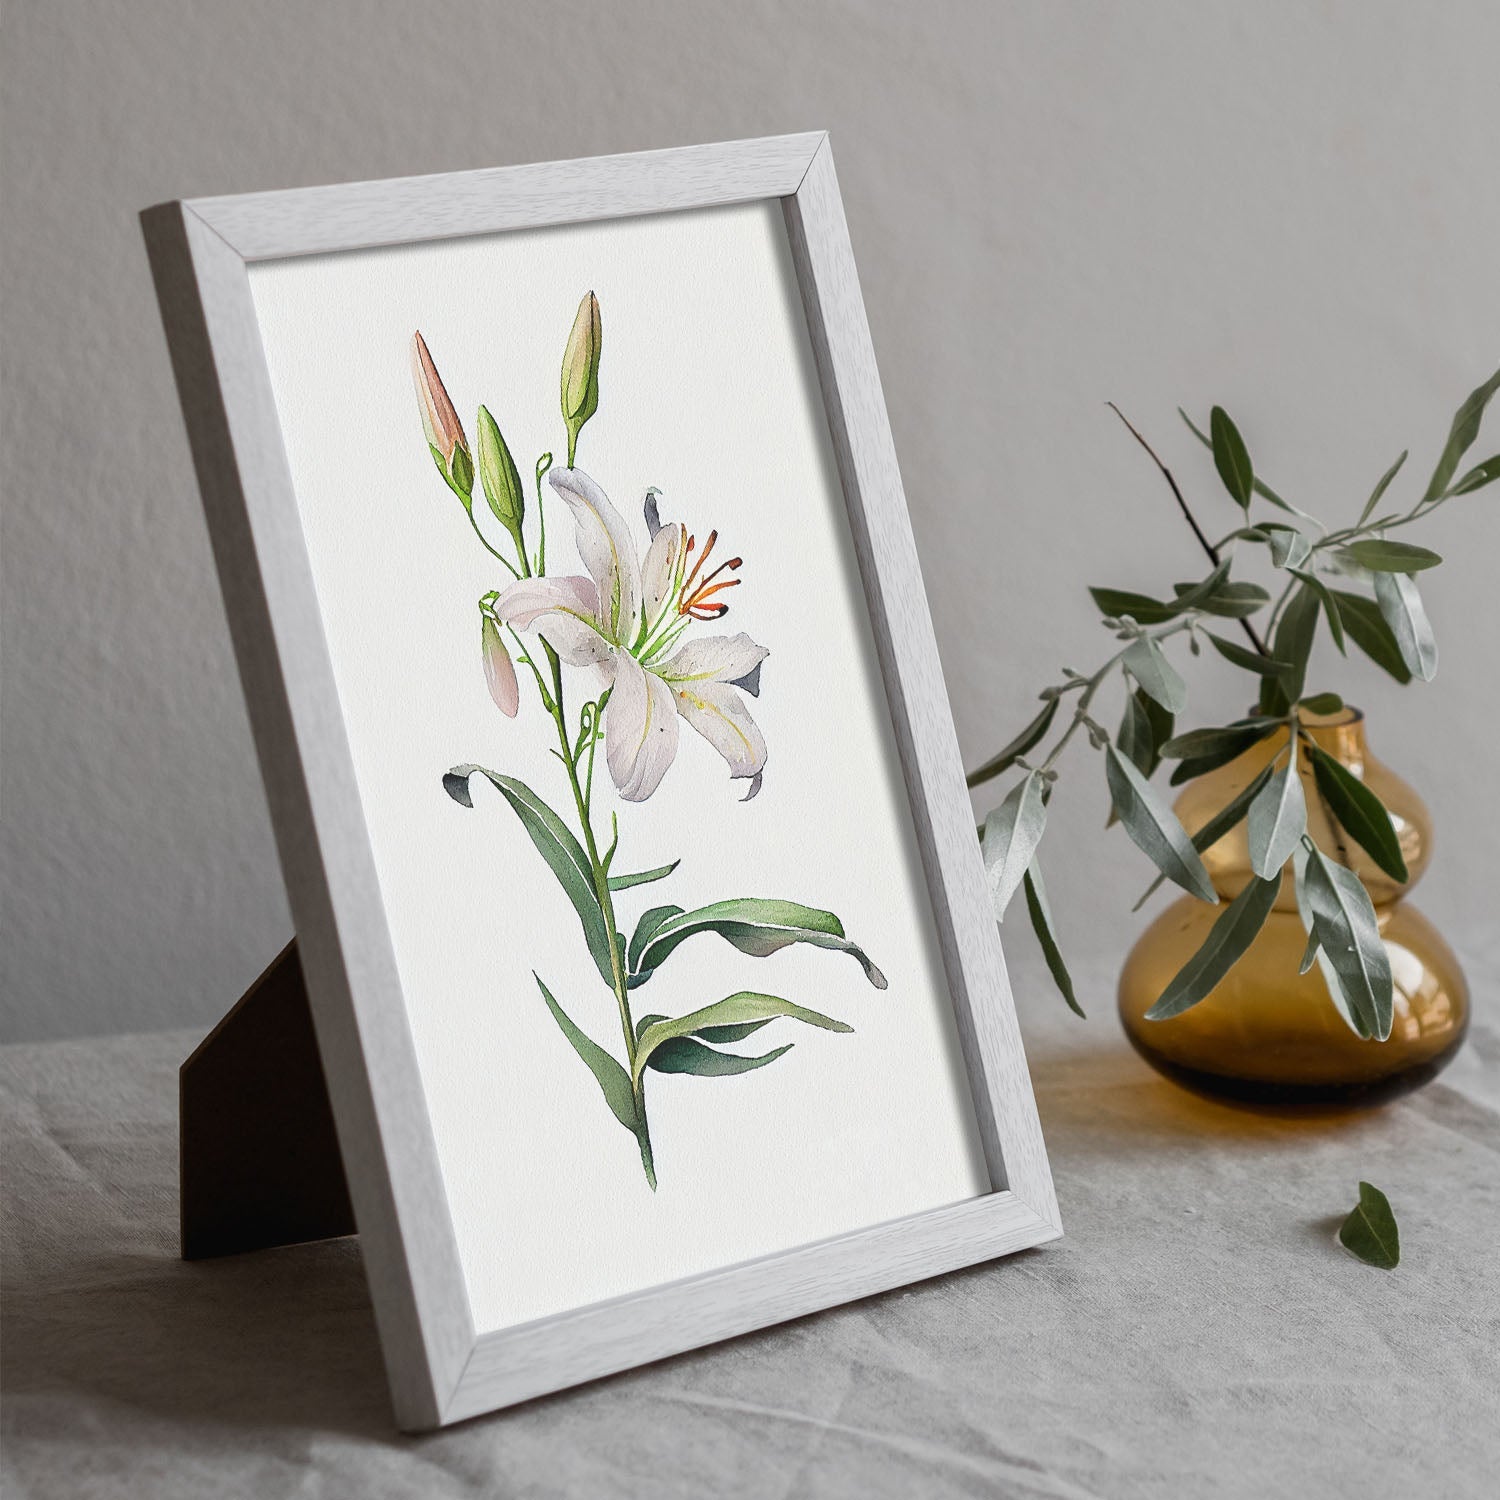 Nacnic watercolor minmal Lily. Aesthetic Wall Art Prints for Bedroom or Living Room Design.-Artwork-Nacnic-A4-Sin Marco-Nacnic Estudio SL